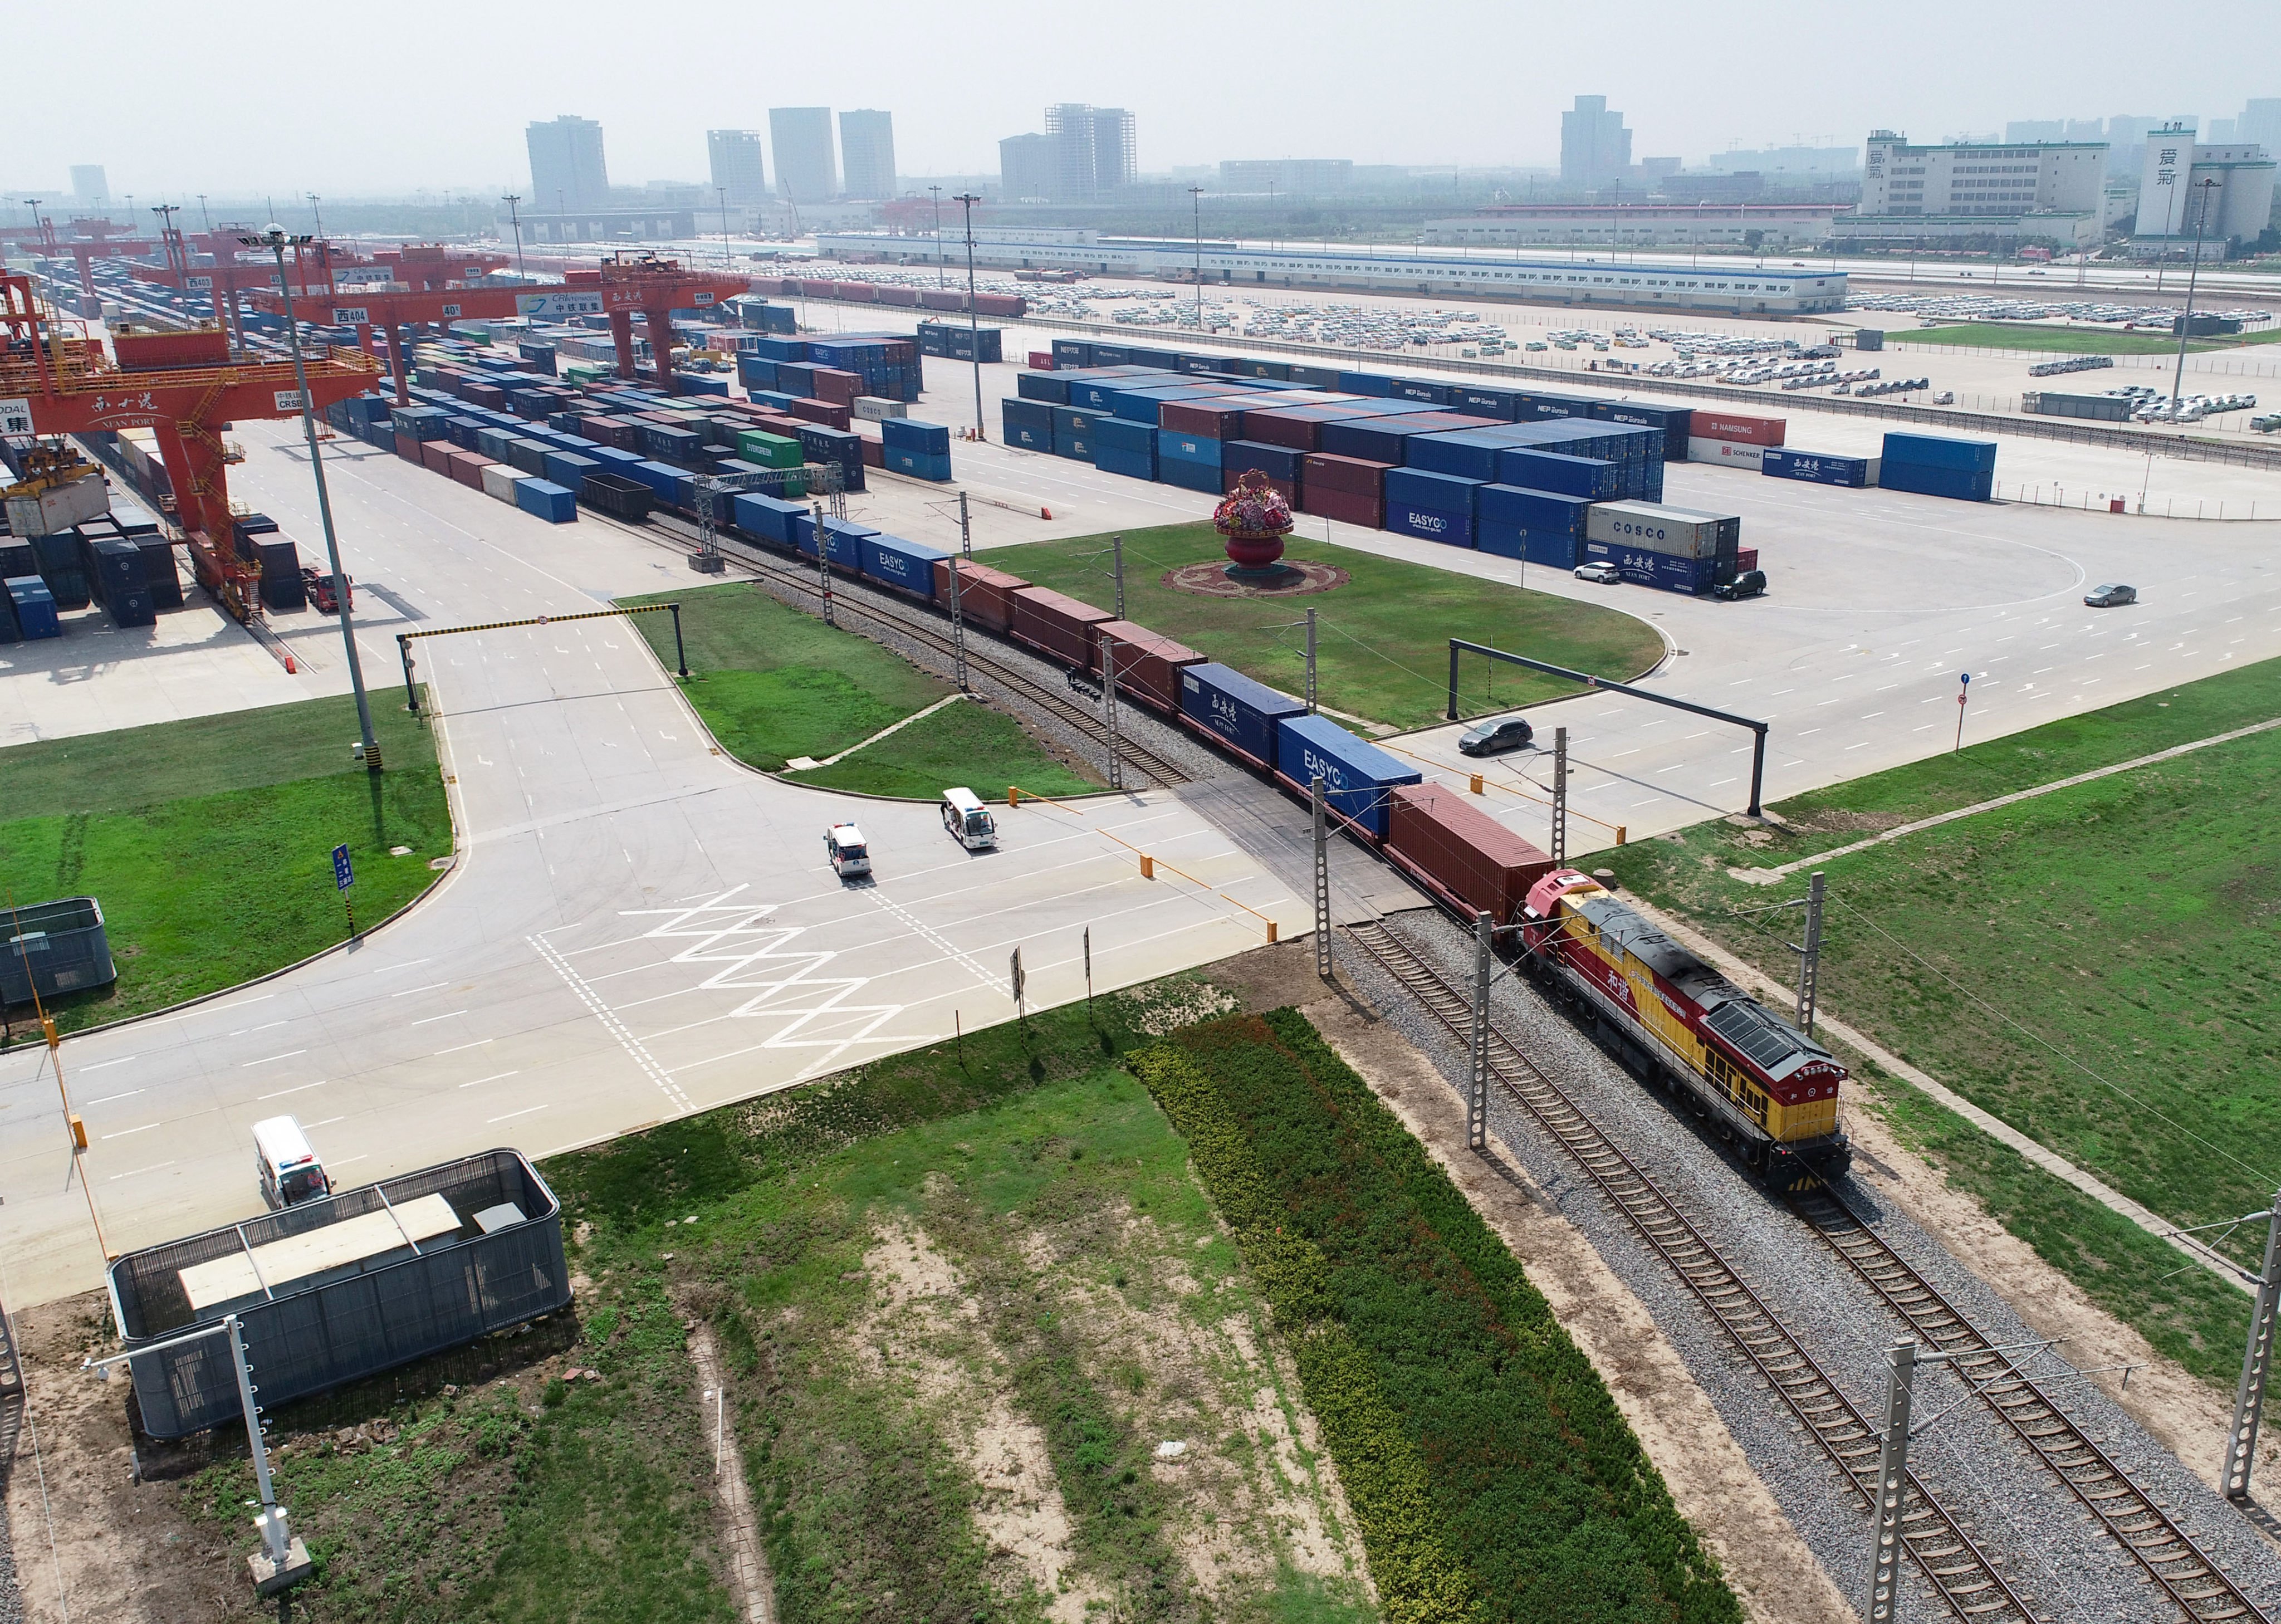 A China-Europe freight train leaves for Kazakhstan from Xian International Port in Shaanxi province on July 29, 2022. Sanctions against Russia have complicated China’s rail links with Central Asia and Europe, giving greater impetus to its efforts to establish an alternative route that runs through Kyrgyzstan and Uzbekistan. Photo: Xinhua